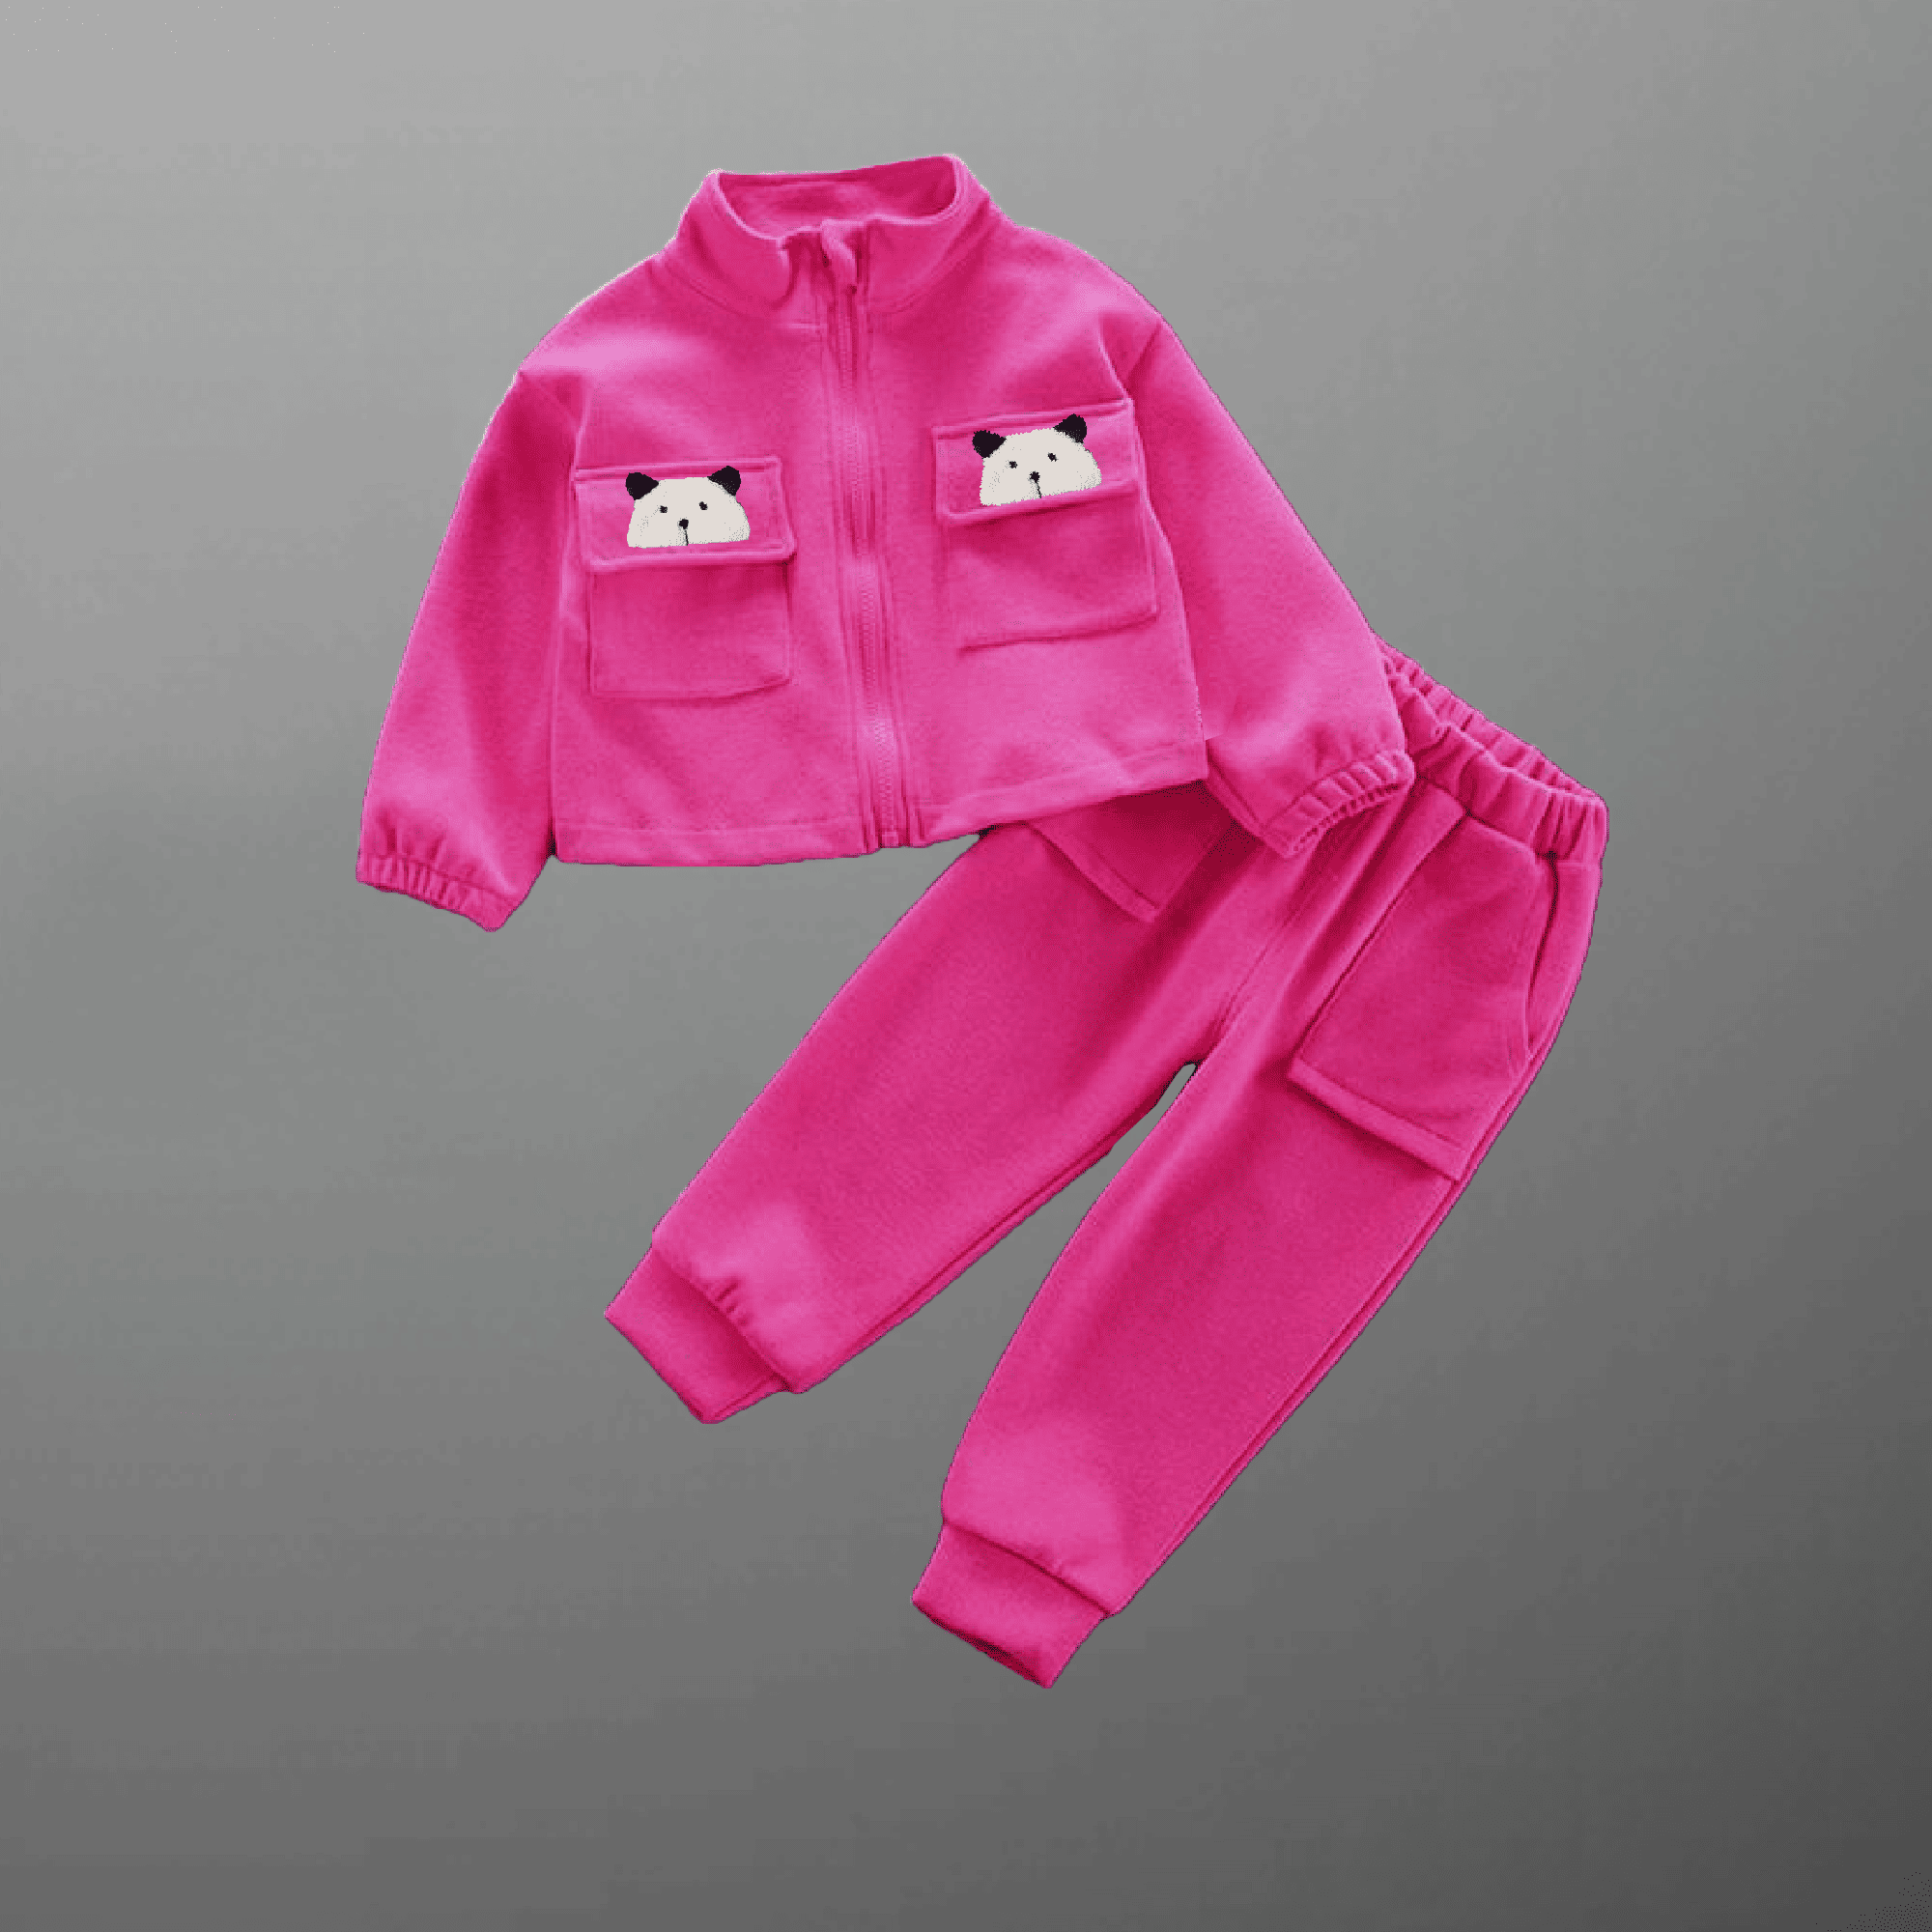 Girl's Pink 2 Piece set of Top and Bottom with Pocket-RKFCW501